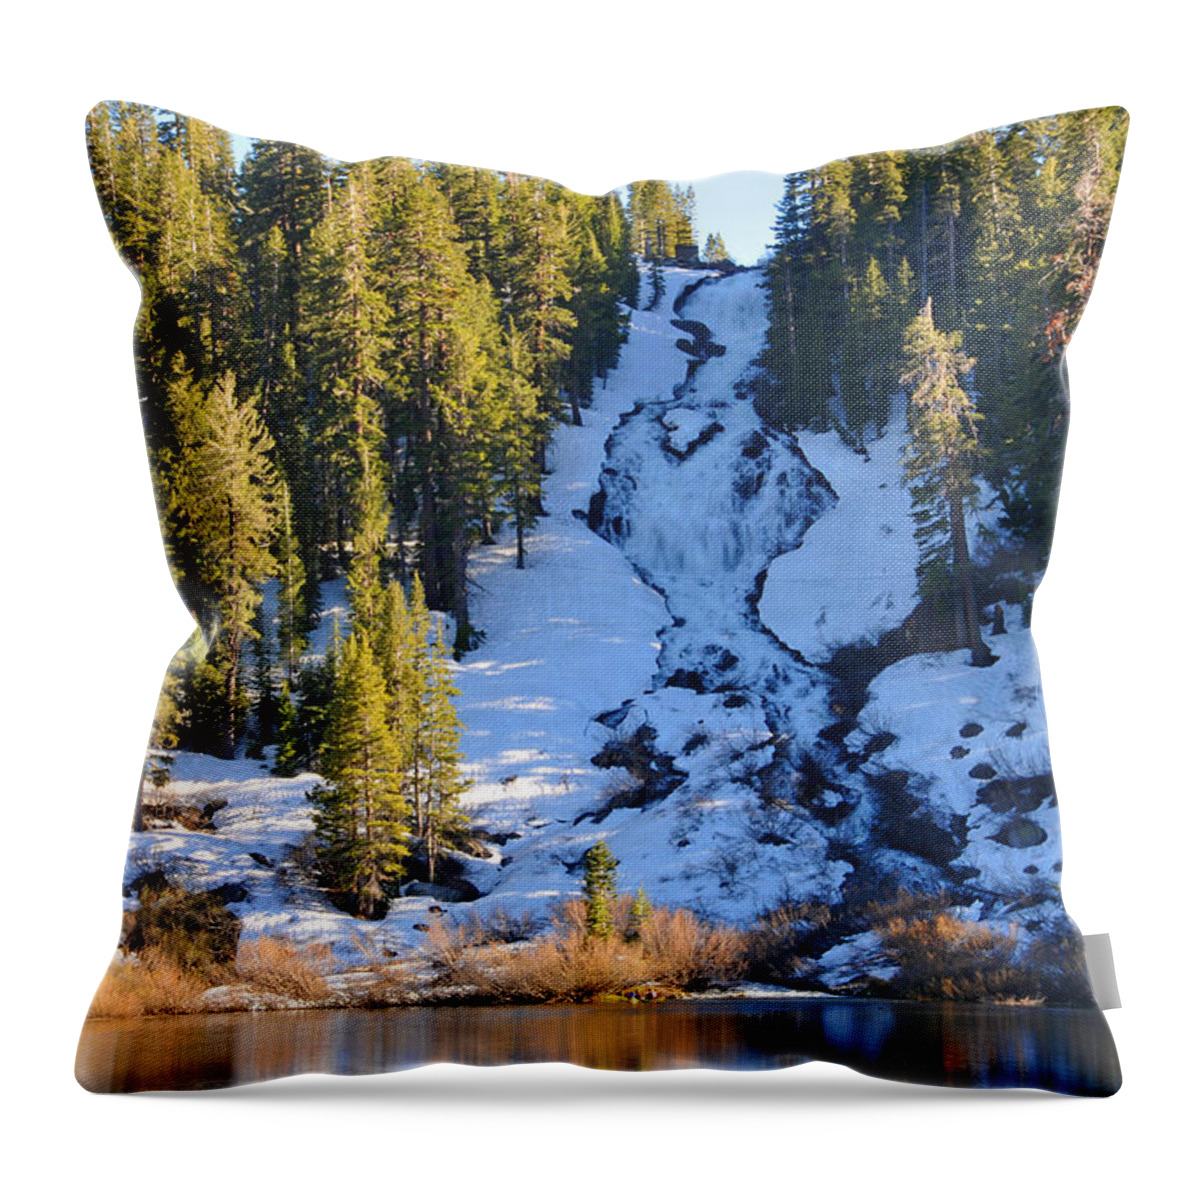 Waterfall Throw Pillow featuring the photograph Snowy Heart Falls by Lynn Bauer